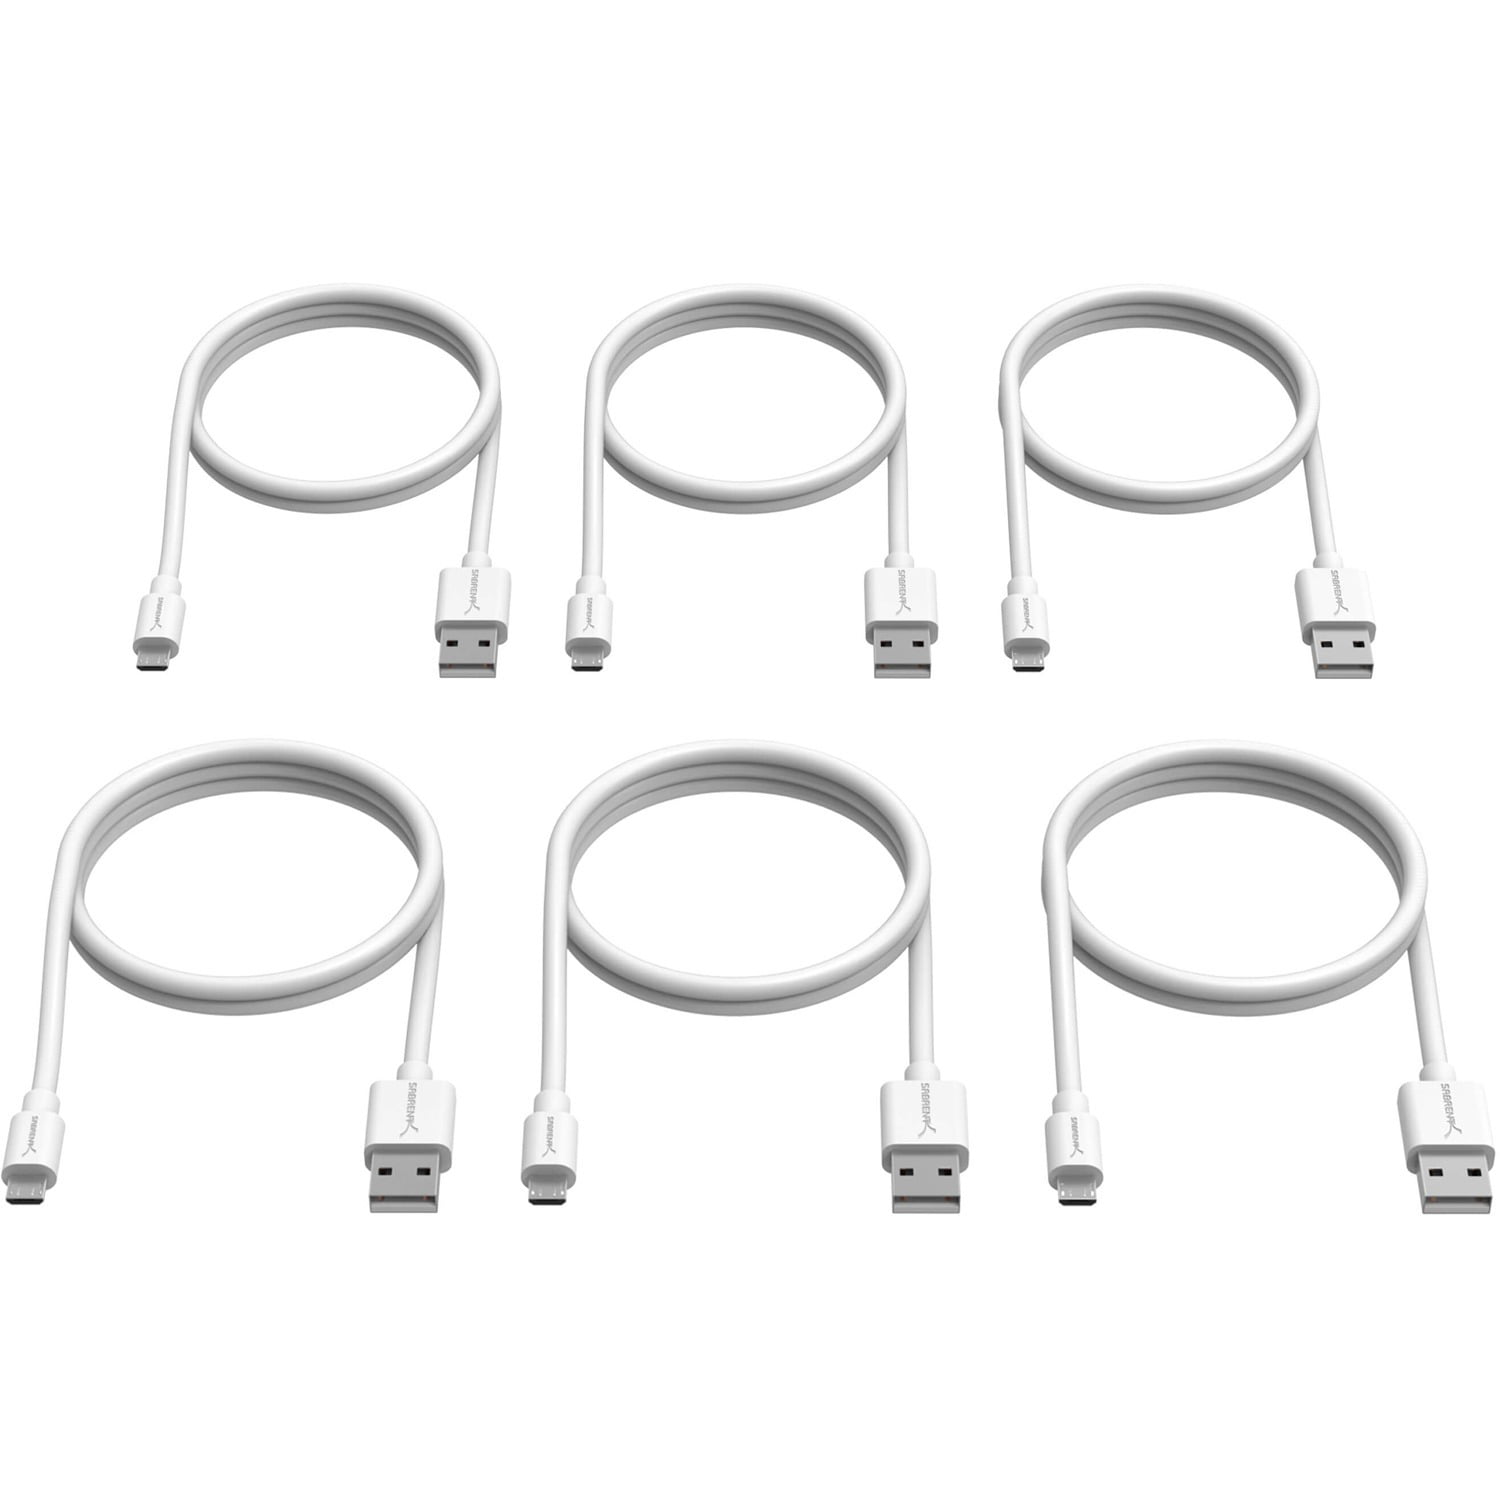 22AWG Premium 3ft USB-C to USB A 2.0 Sync and Charge Cables Sabrent USB Type-C Dual HDMI Adapter + 6-Pack